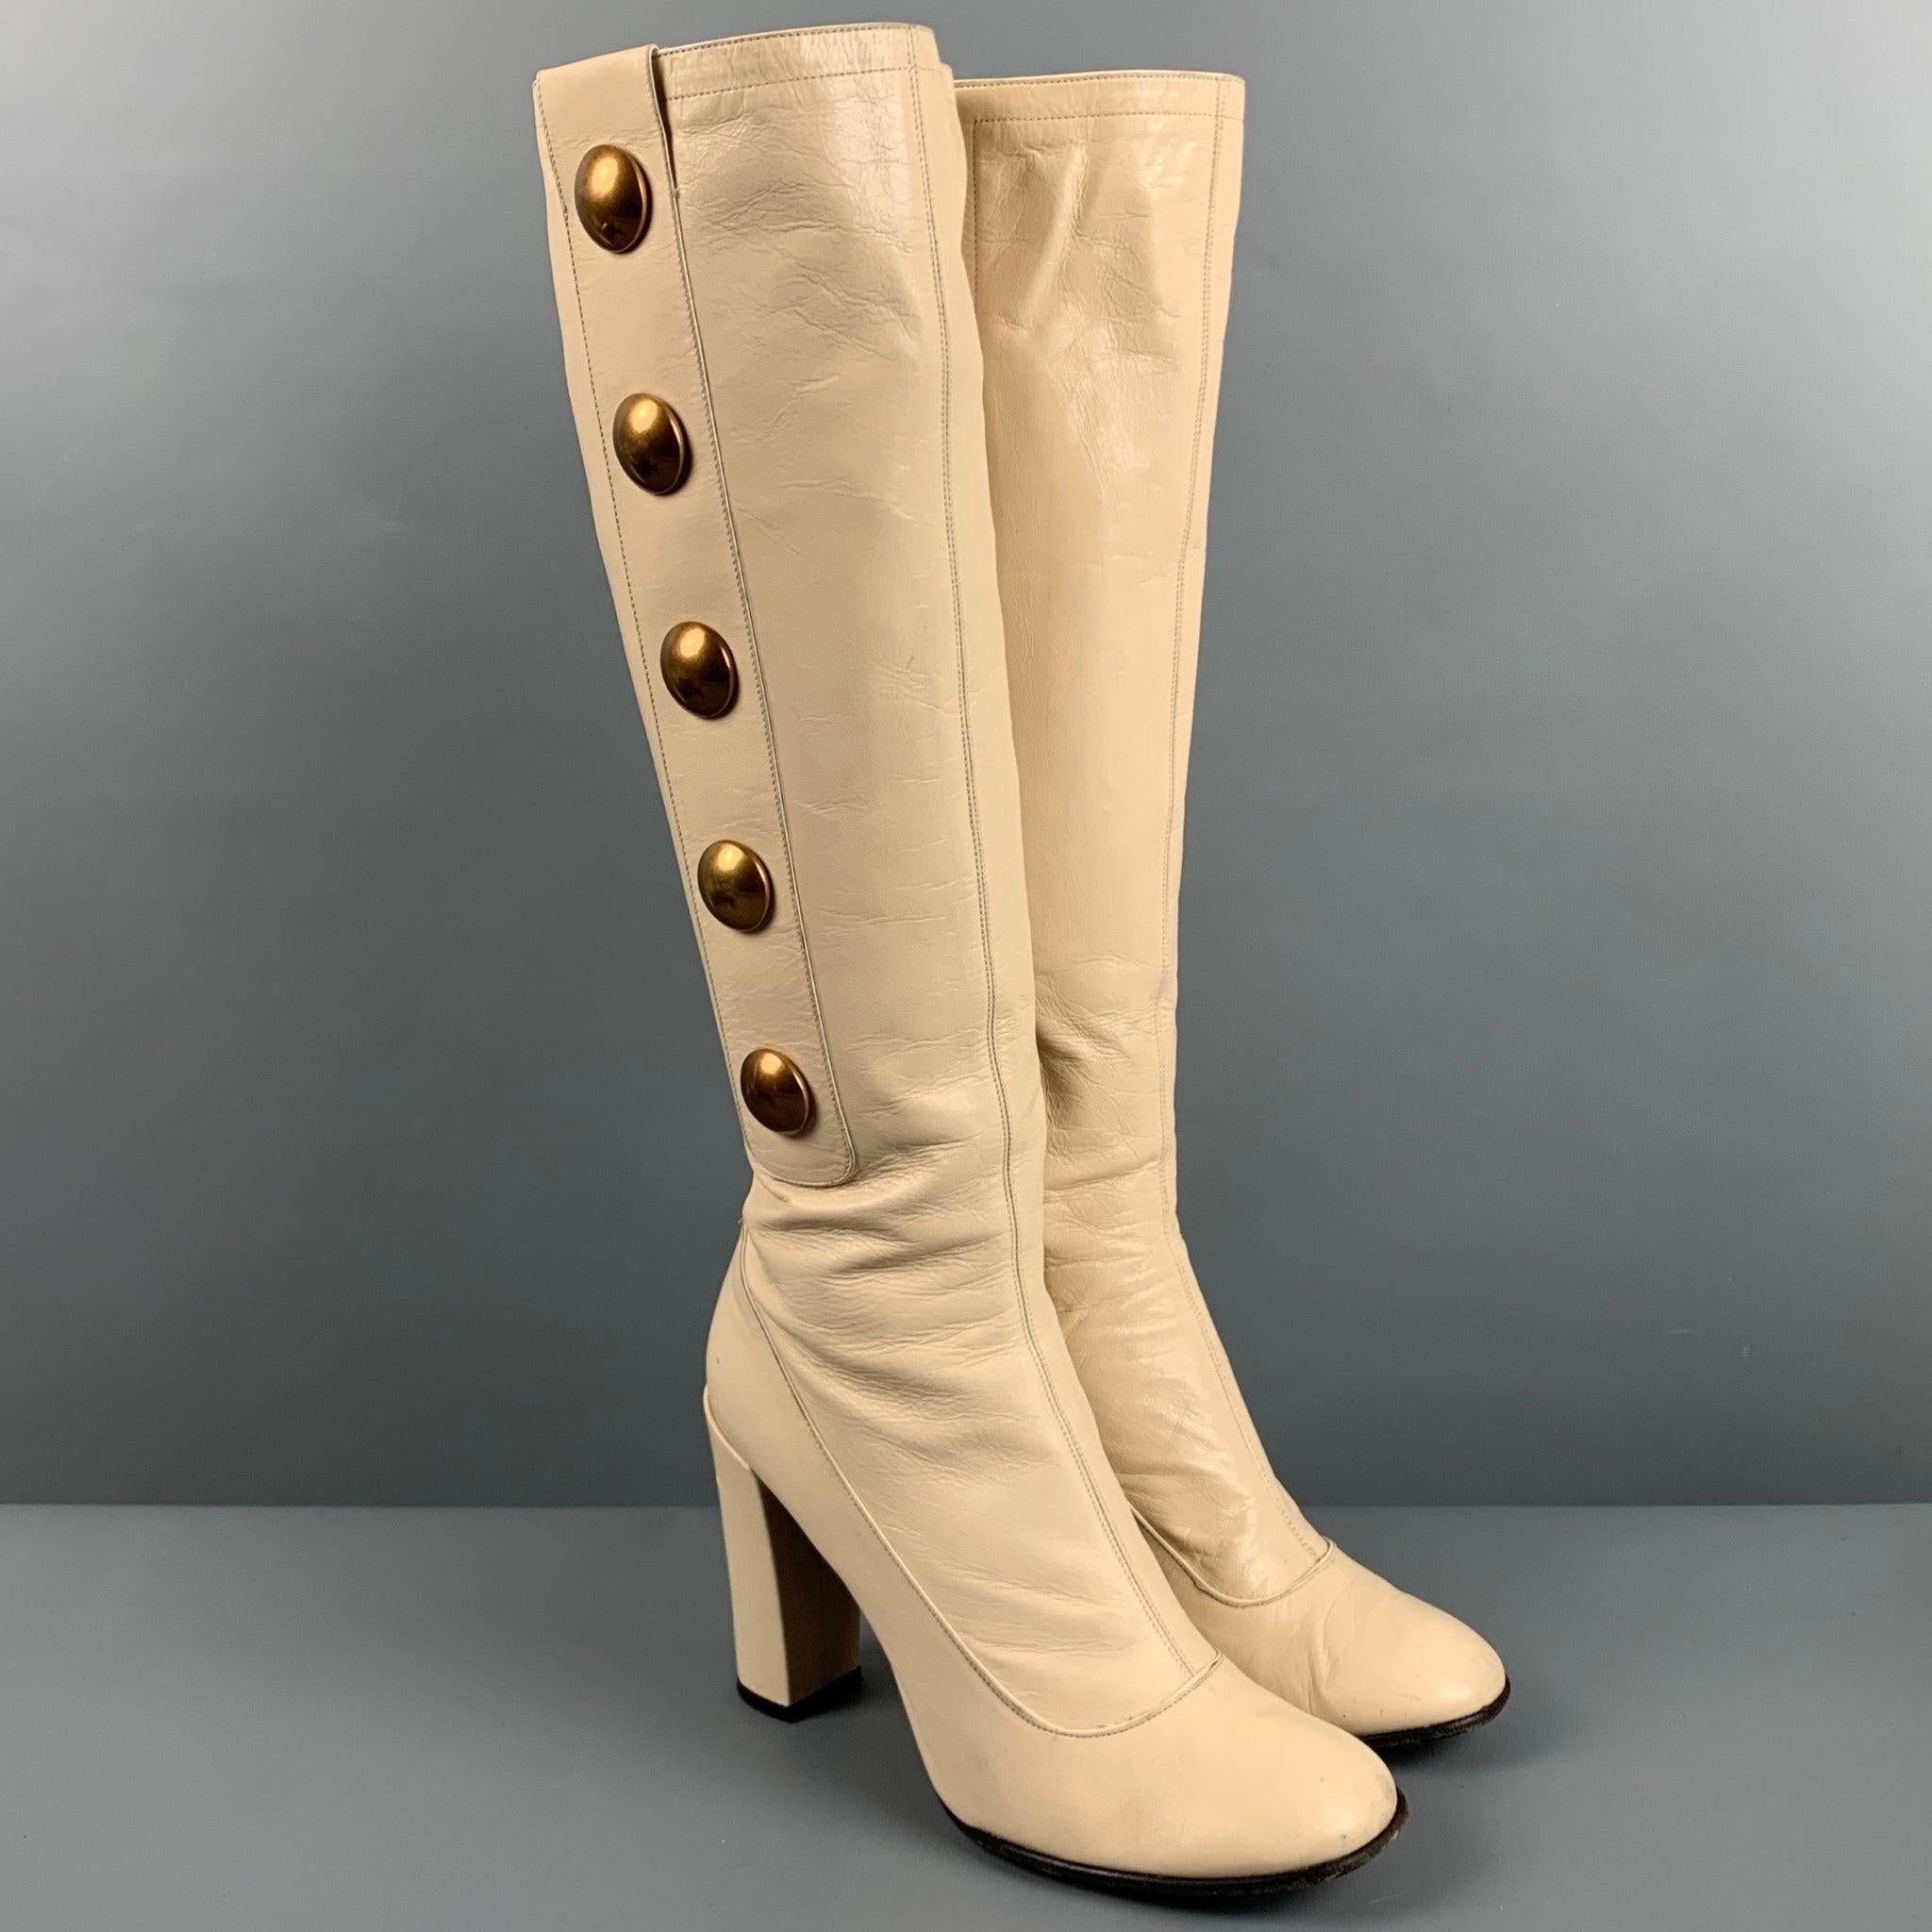 Vintage MARC JACOBS boots
in a cream leather featuring brass tone studs, knee high style, and chunky heel. Made in Italy. Very Good Pre-Owned Condition. Minor signs of wear. 

Marked:   37.5 

Measurements: 
  Length: 8.5 inches Width: 3 inches